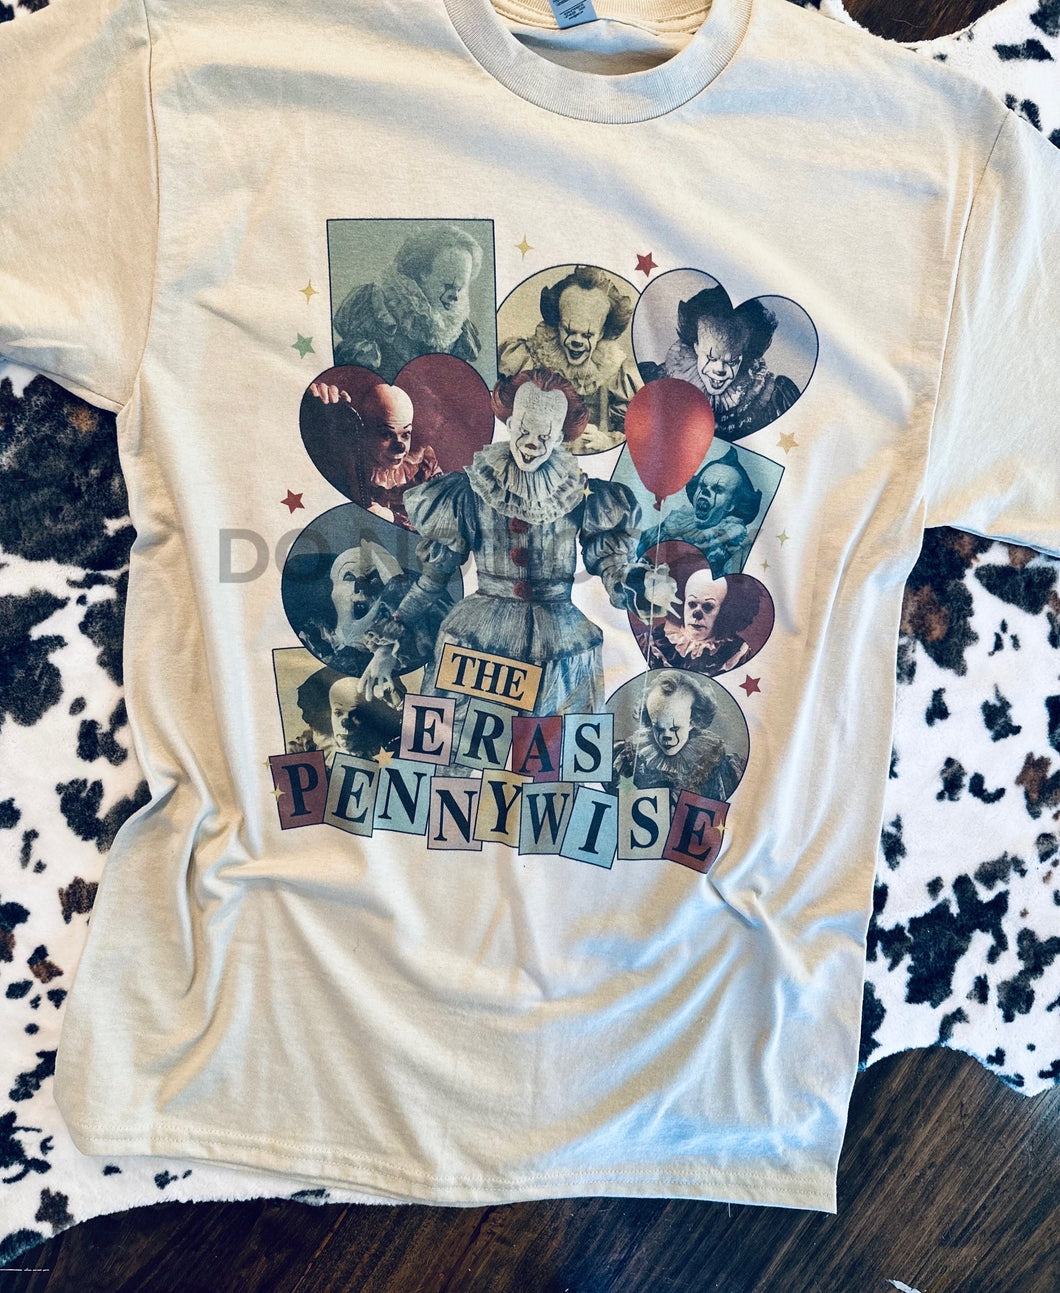 The eras pennywise IT graphic tee - Mavictoria Designs Hot Press Express